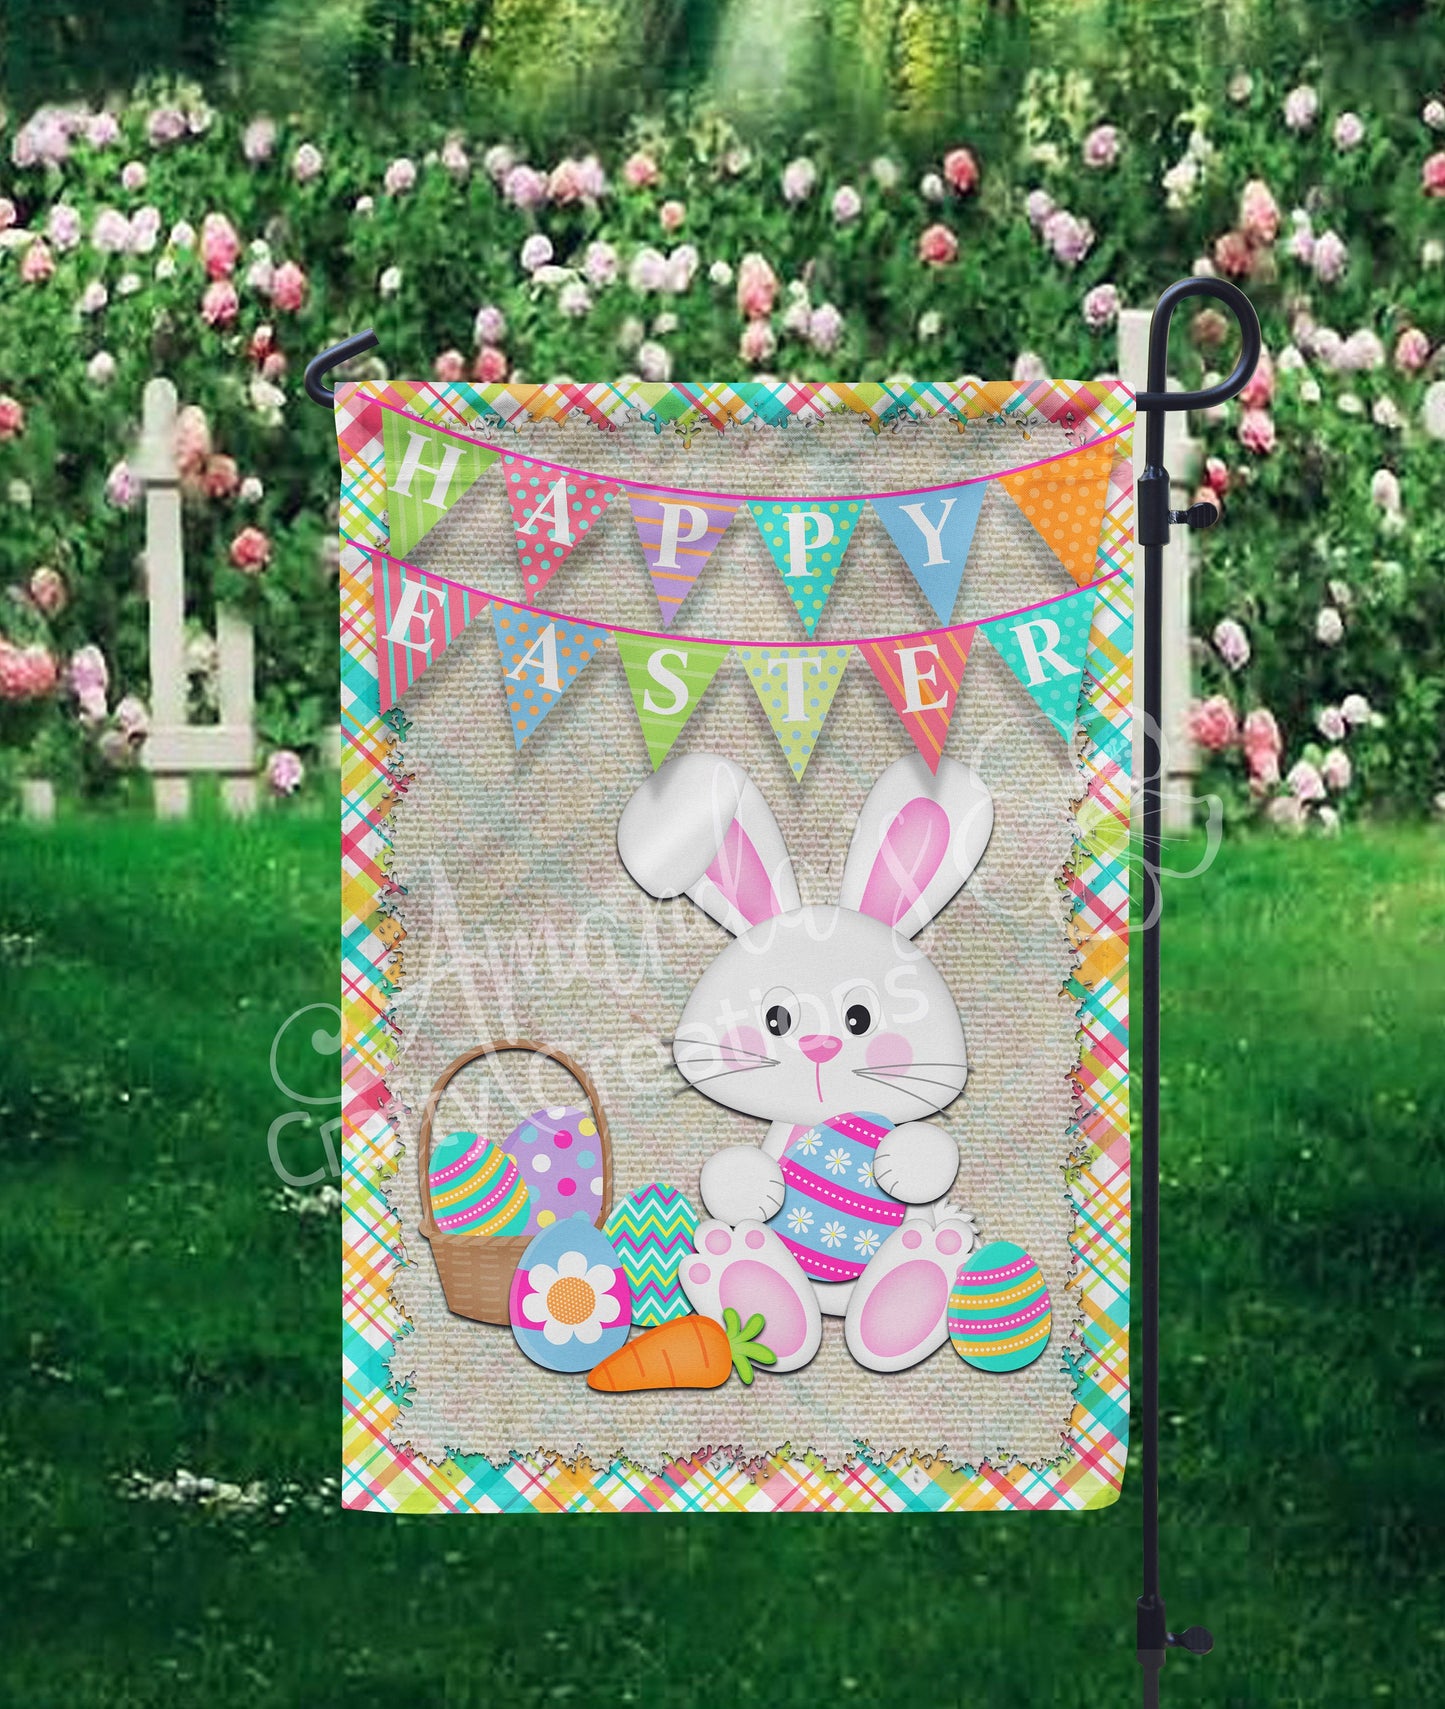 Happy Easter garden flag with baby Easter bunny